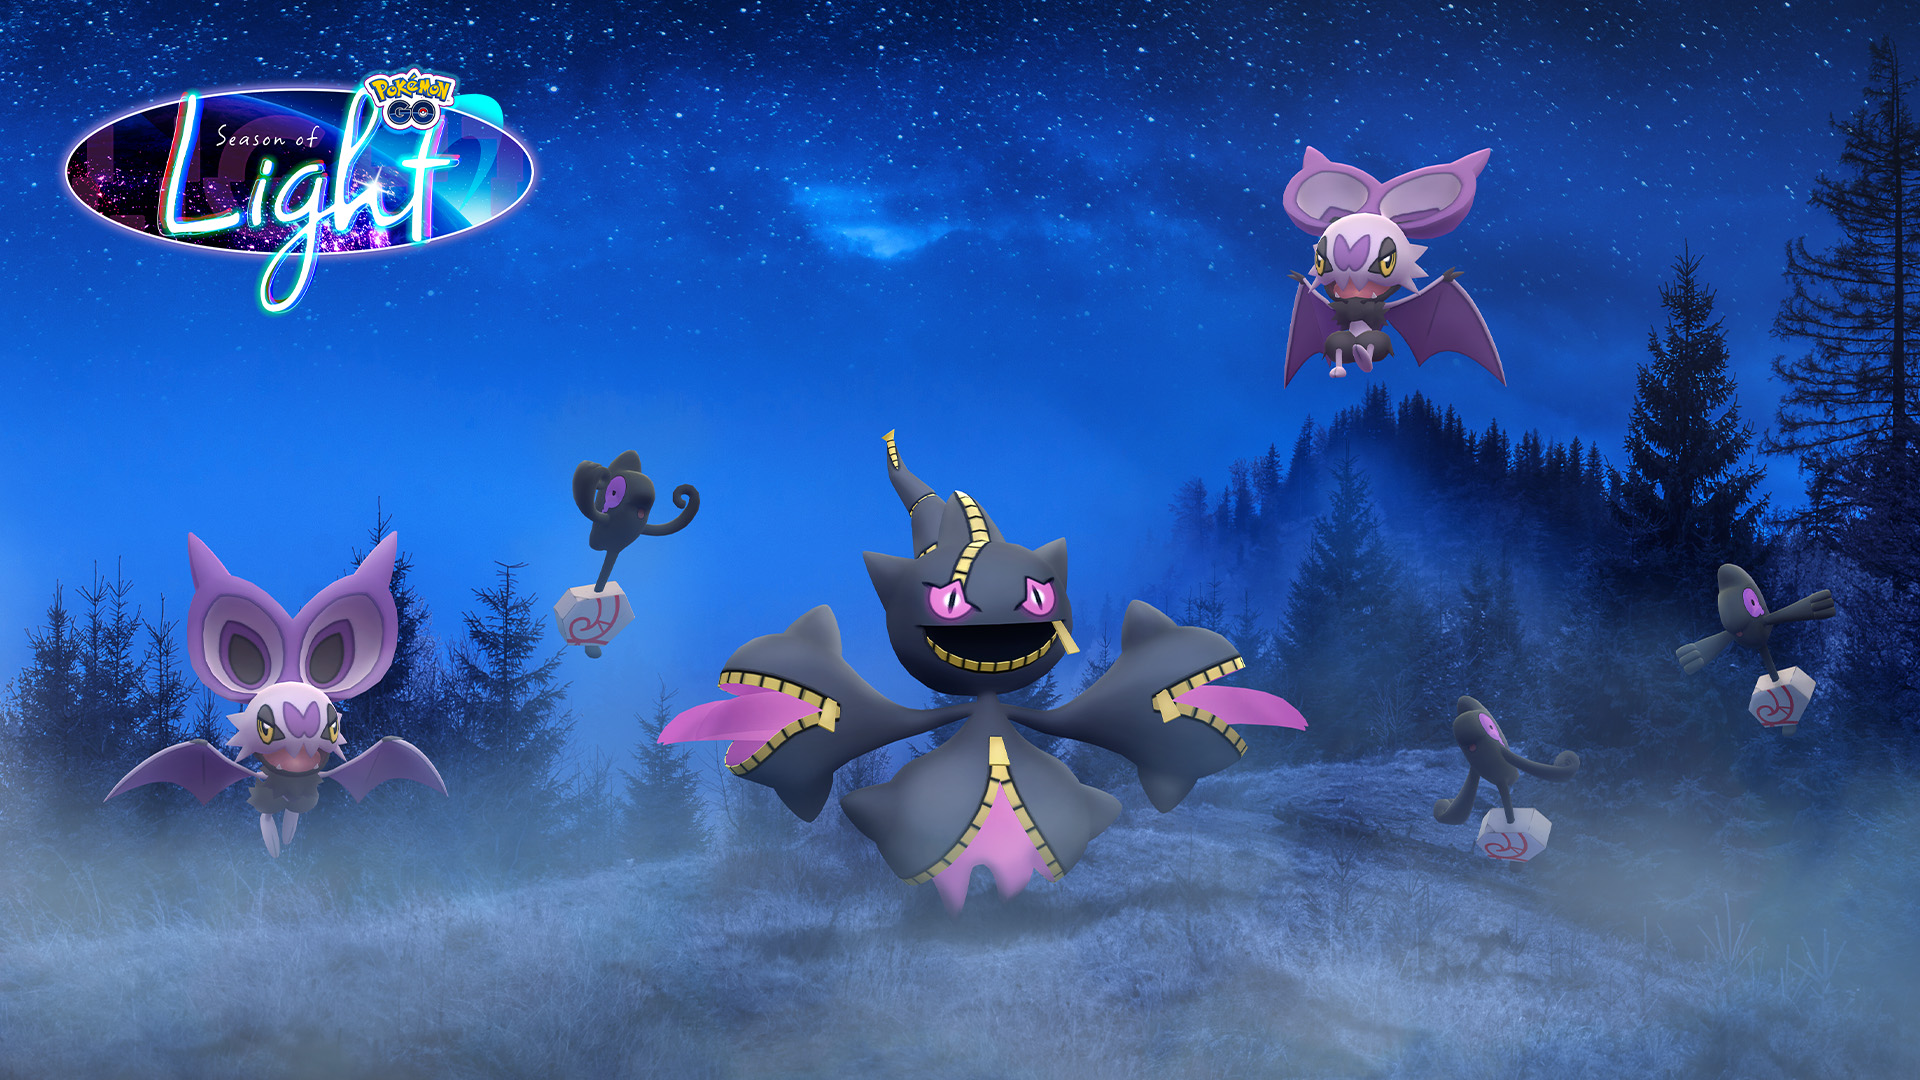 Mega Banette screams in a foggy forest surrounded by Galarian Yamask and Noibat